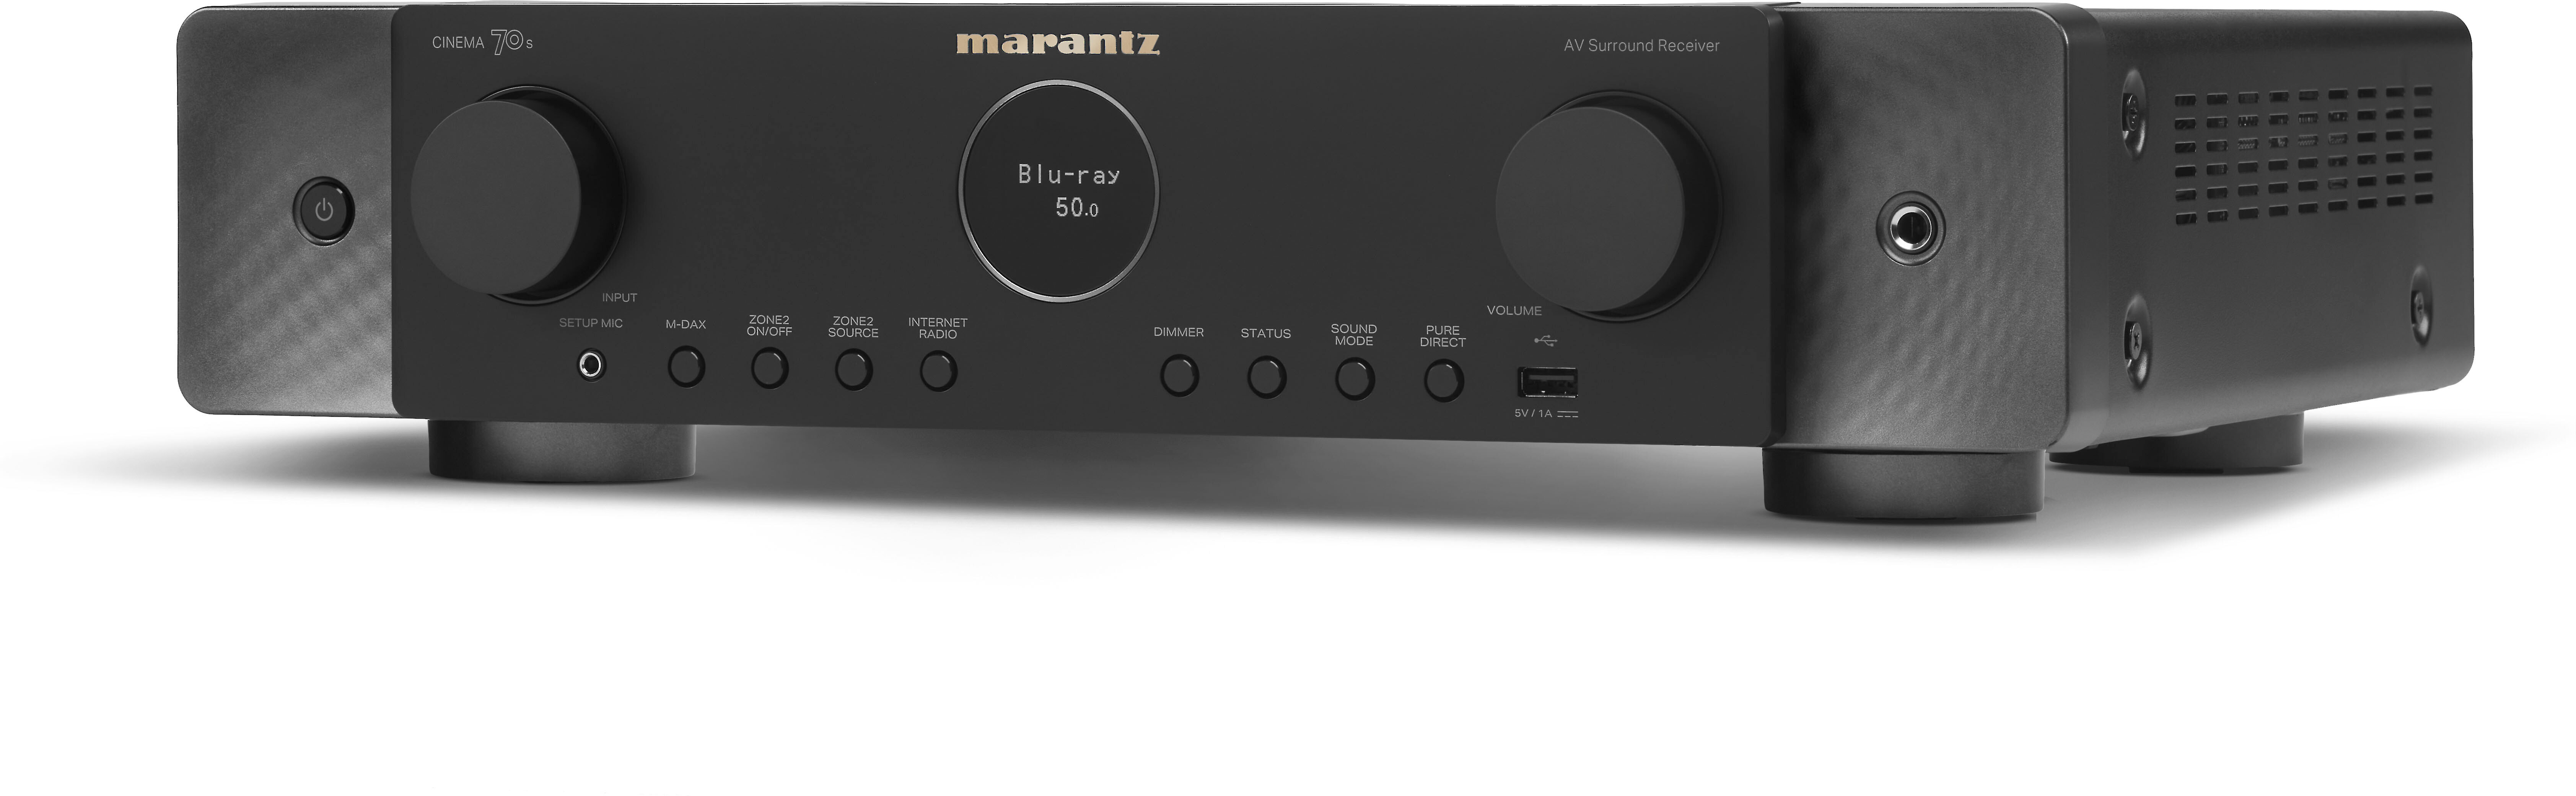 Customer Reviews: Marantz Cinema 70s 7.2-channel slimline home theater  receiver with Dolby Atmos®, Bluetooth®, Apple® AirPlay® 2, and Amazon Alexa  compatibility at Crutchfield